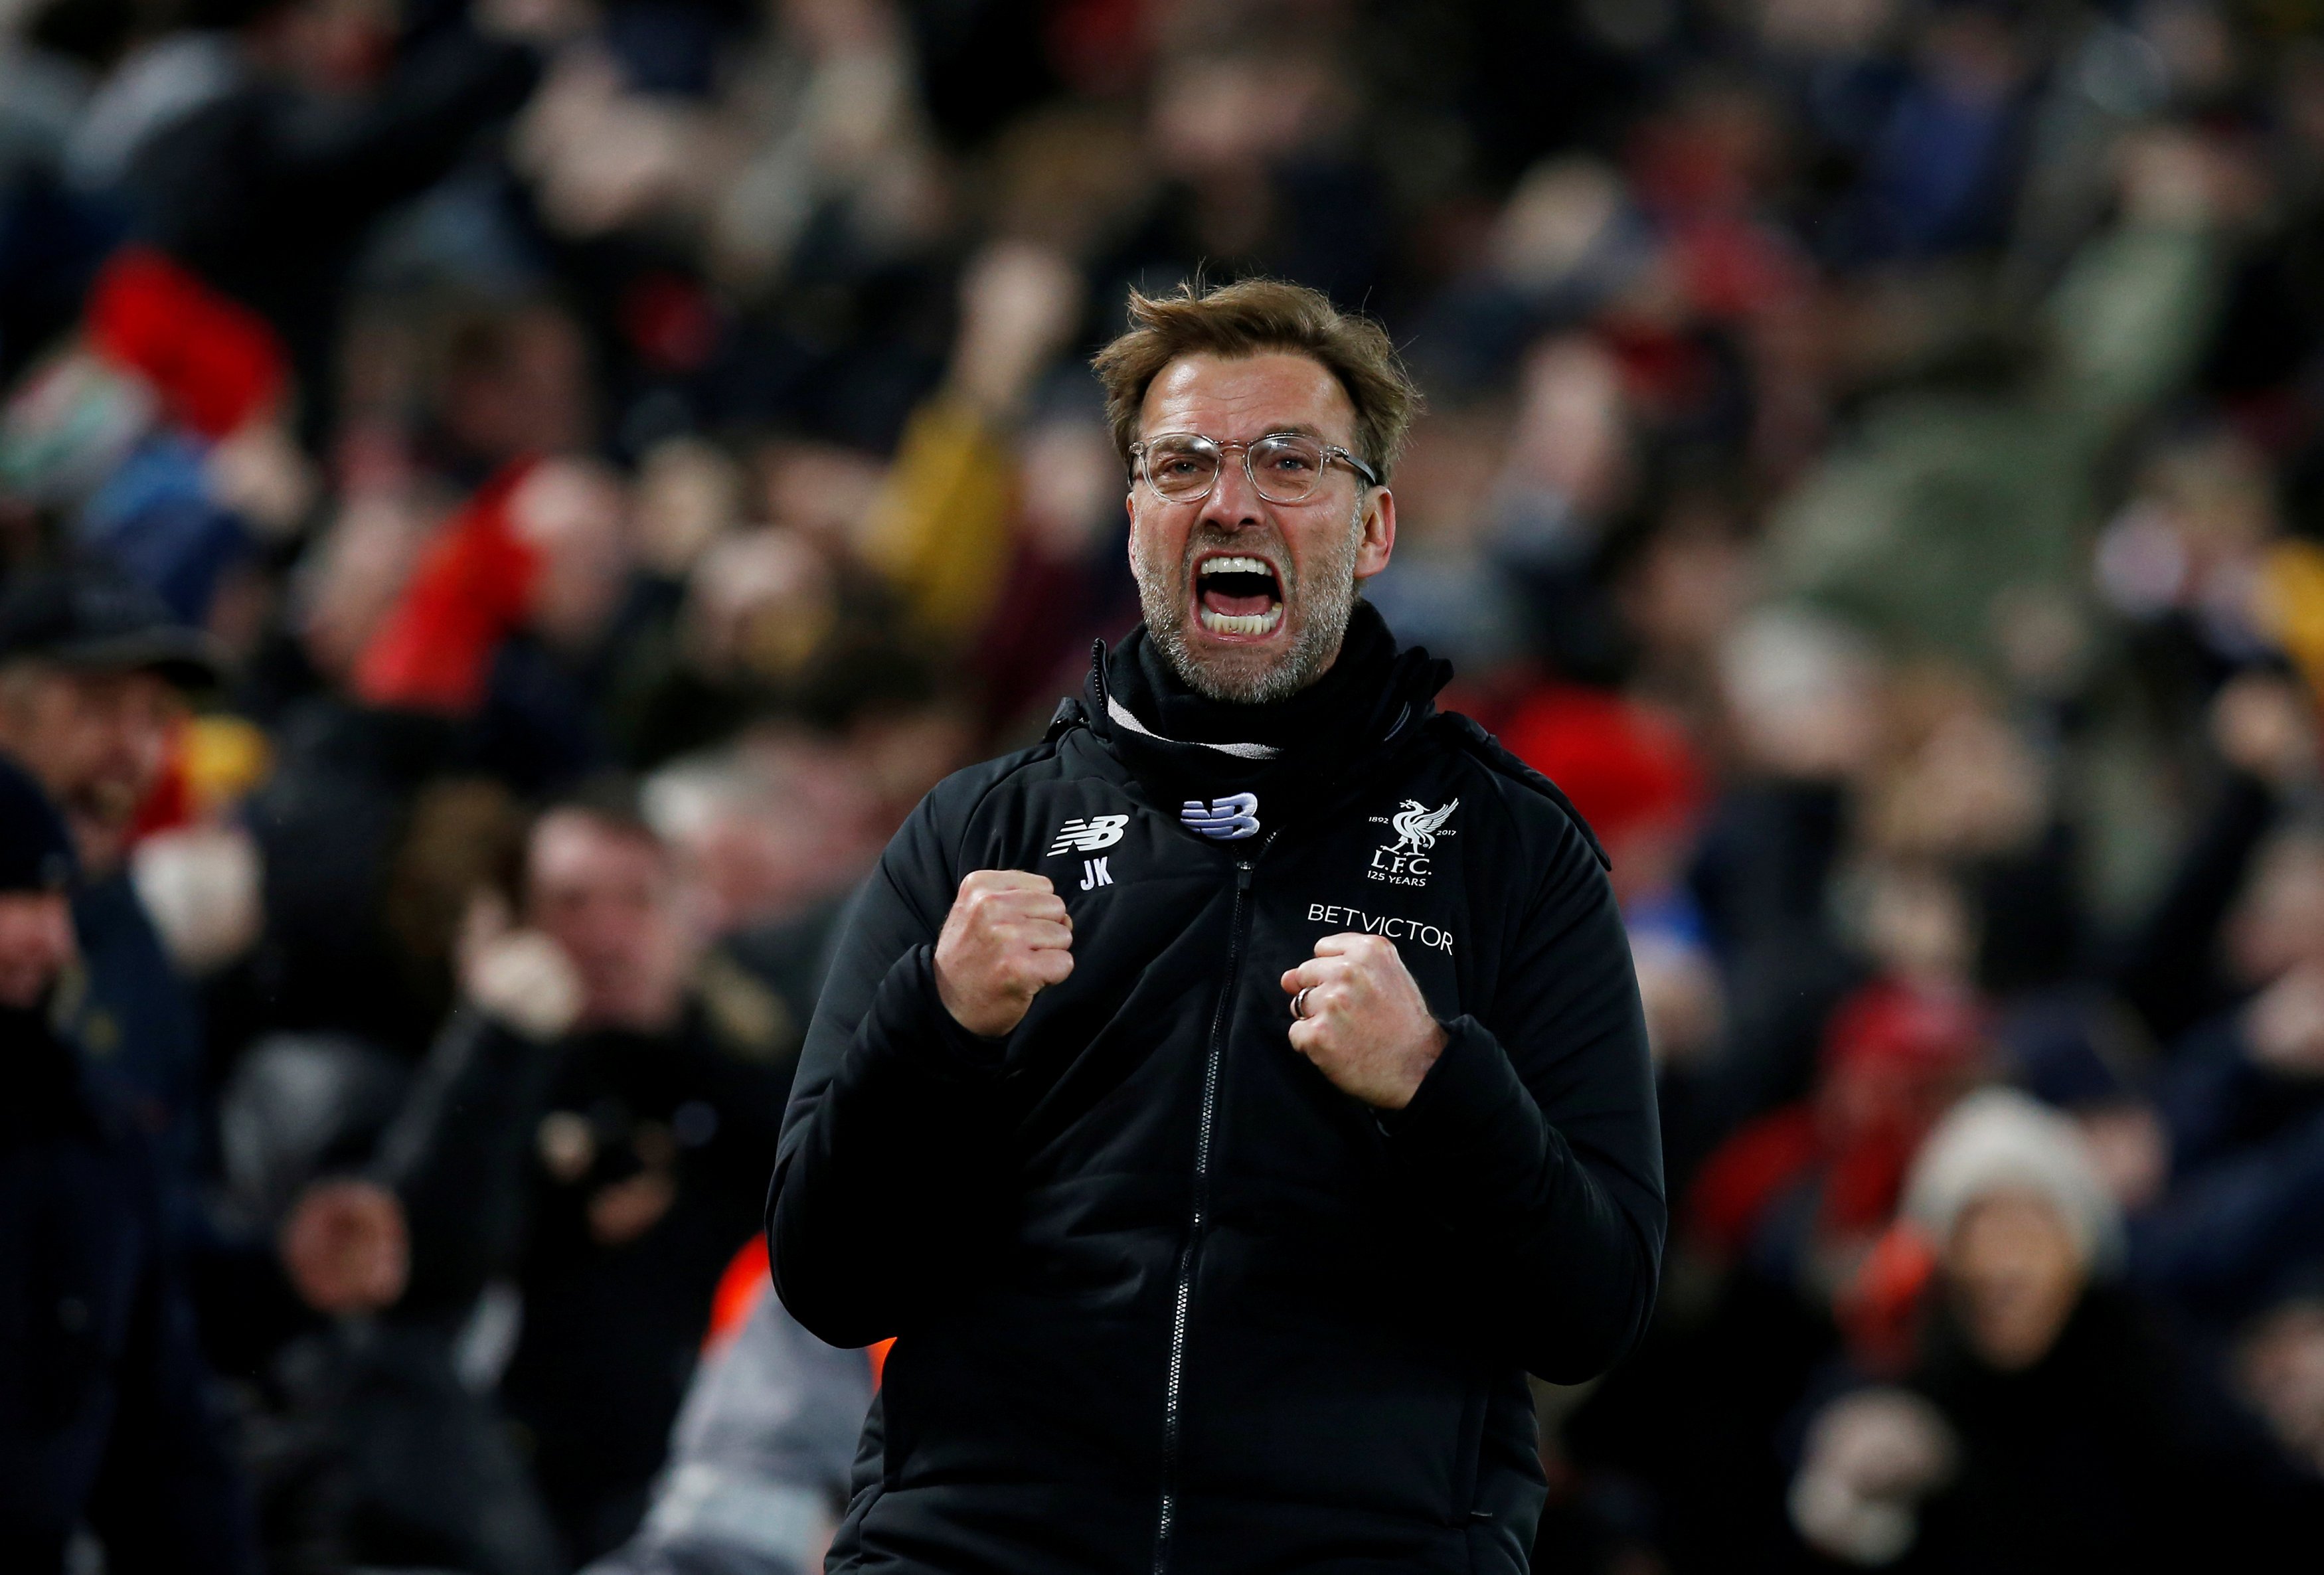 Liverpool 2-2 Tottenham Hotspur: Three talking points from Anfield